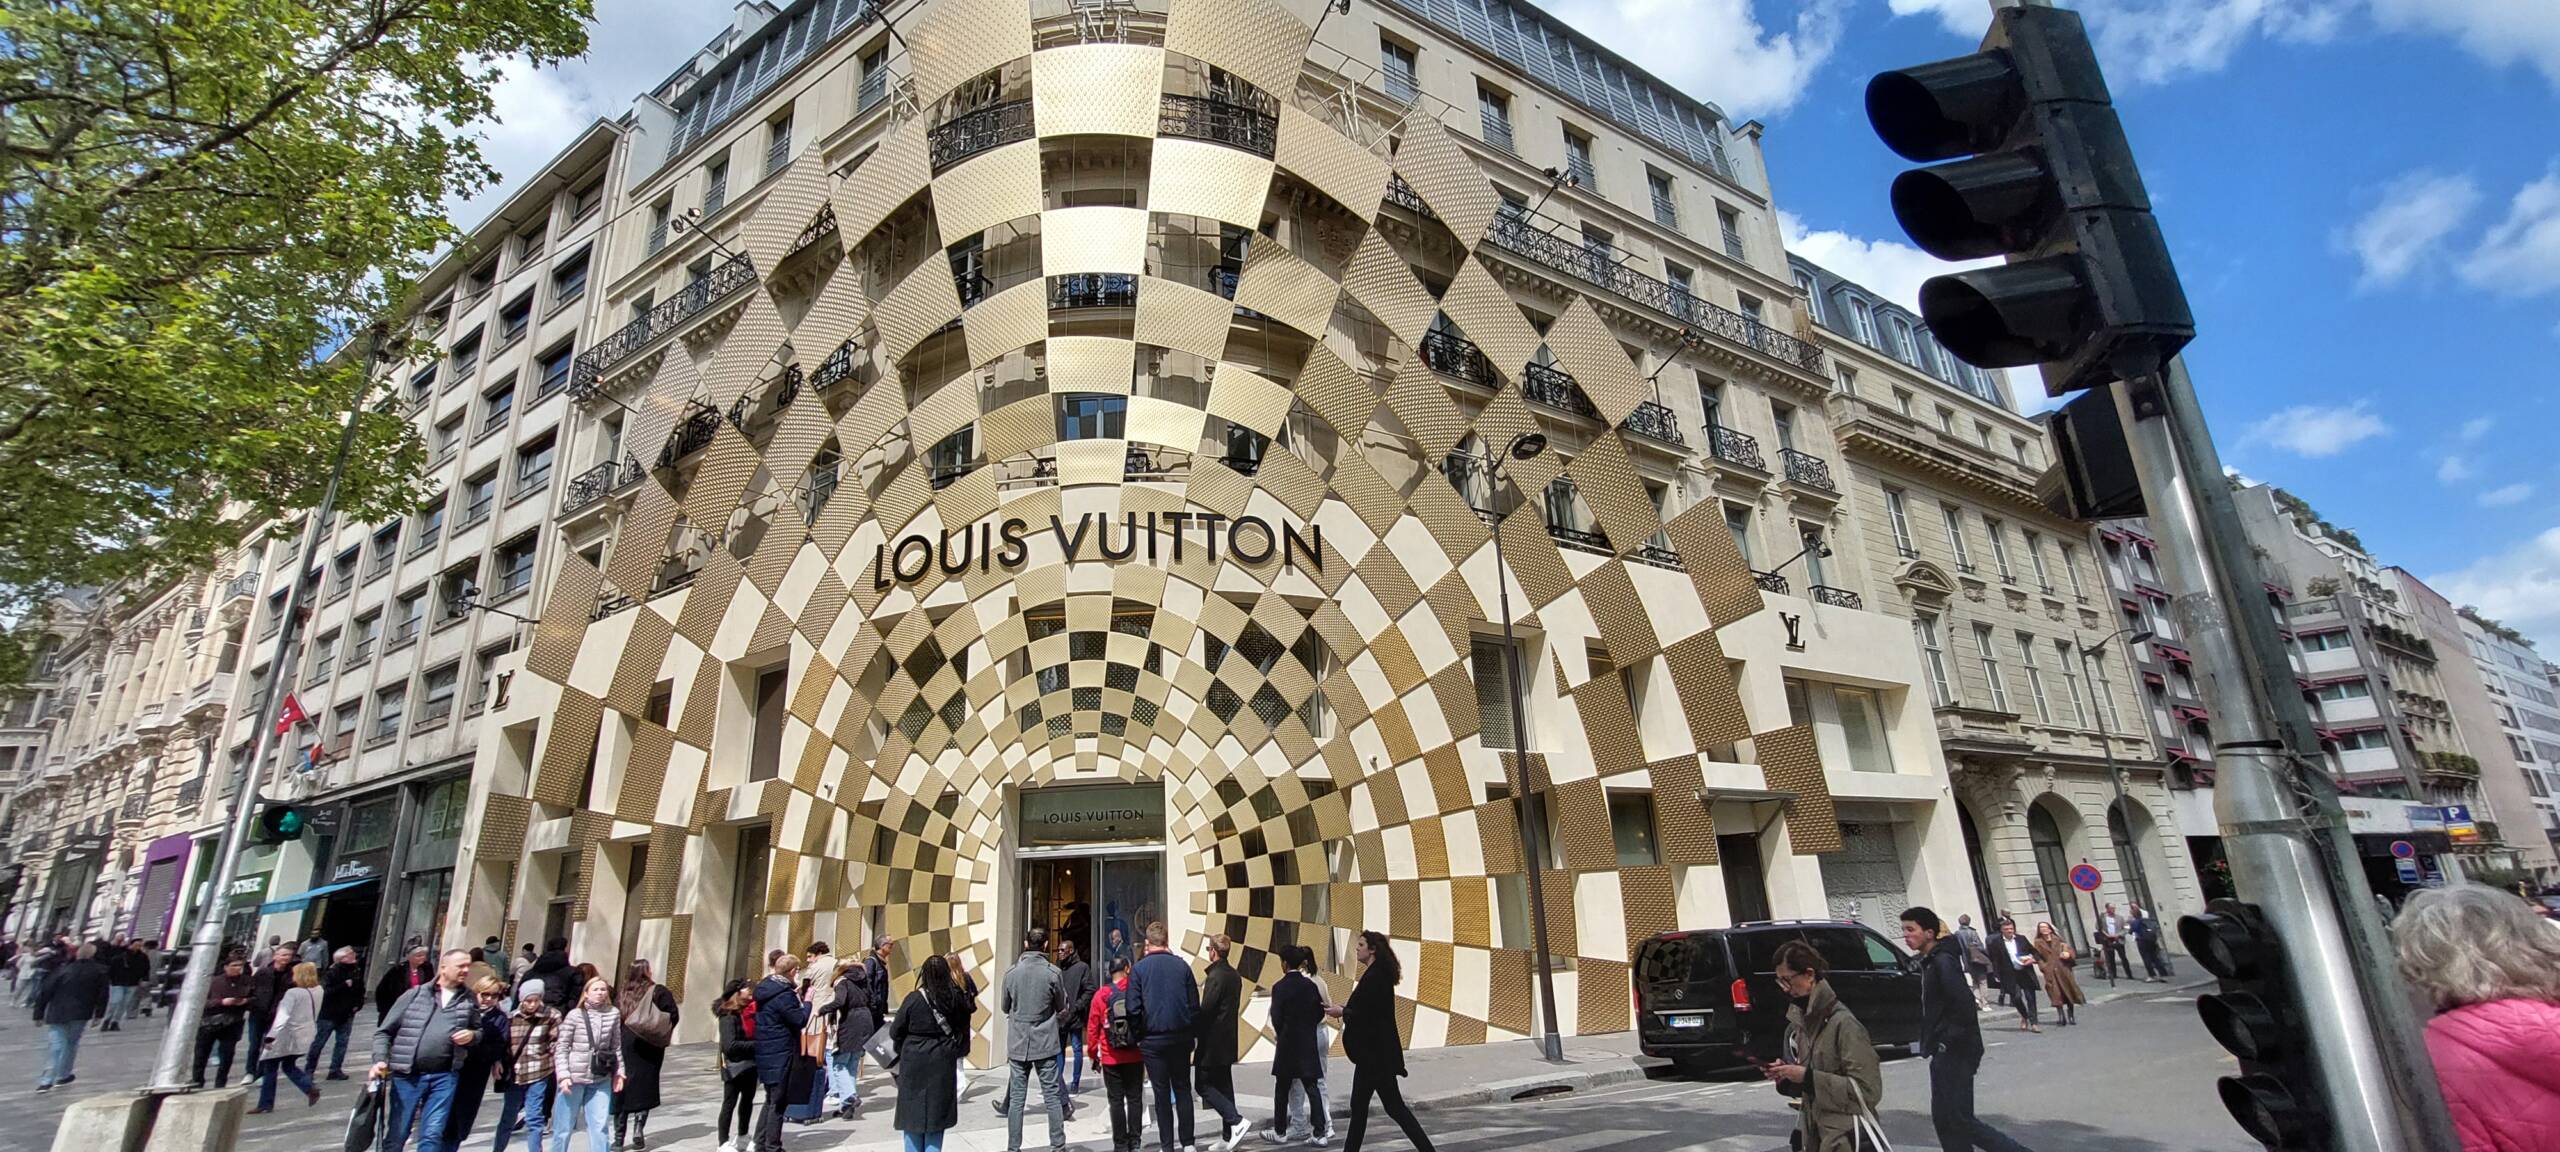 In the heart of Paris, at the iconic Champs-Élysées, stands a symbol of this very exclusivity – the Louis Vuitton flagship store